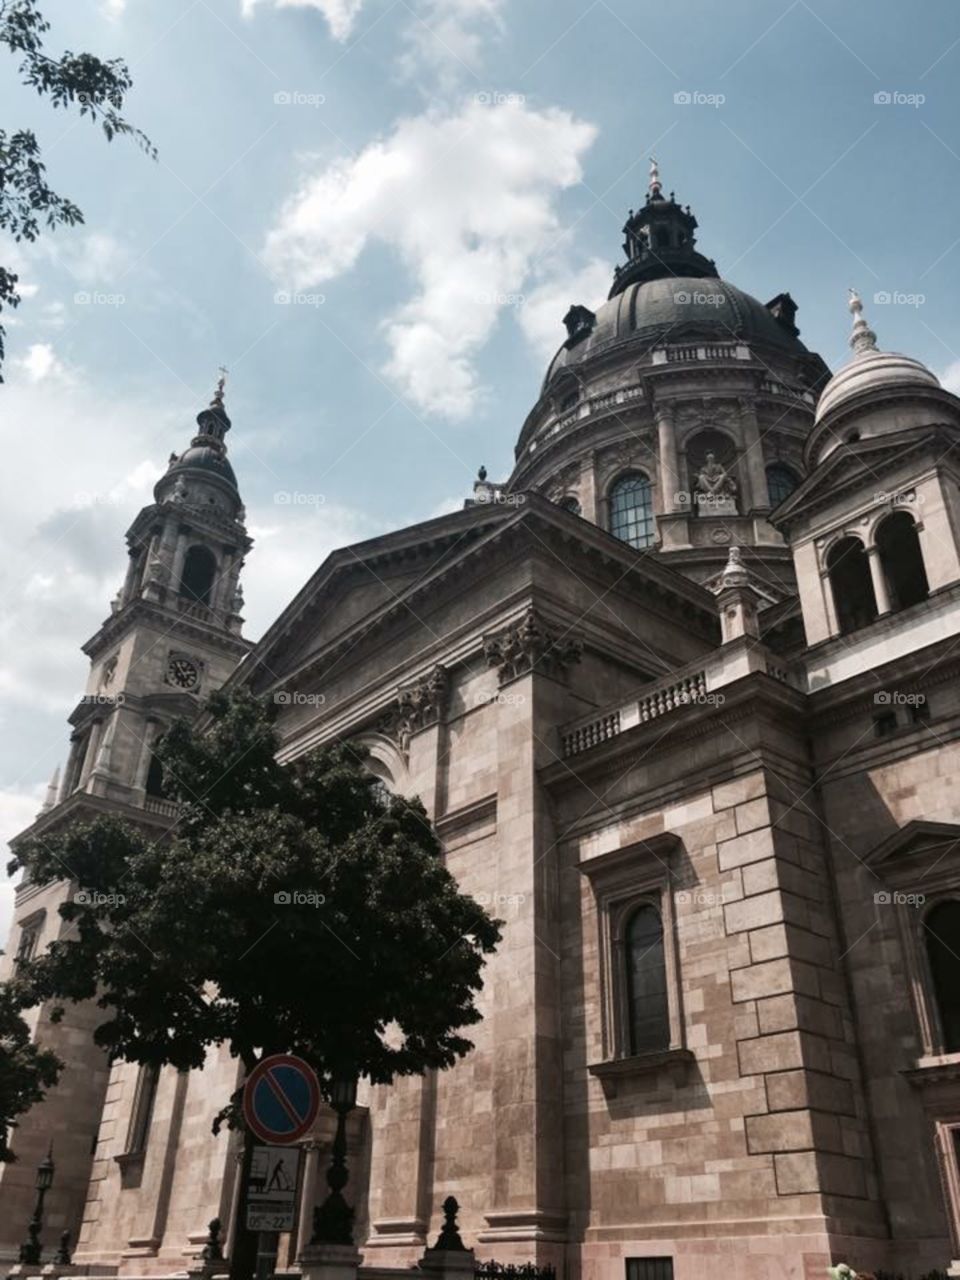 #budapest #church #incredible #oneofthebestcities #LOVE 